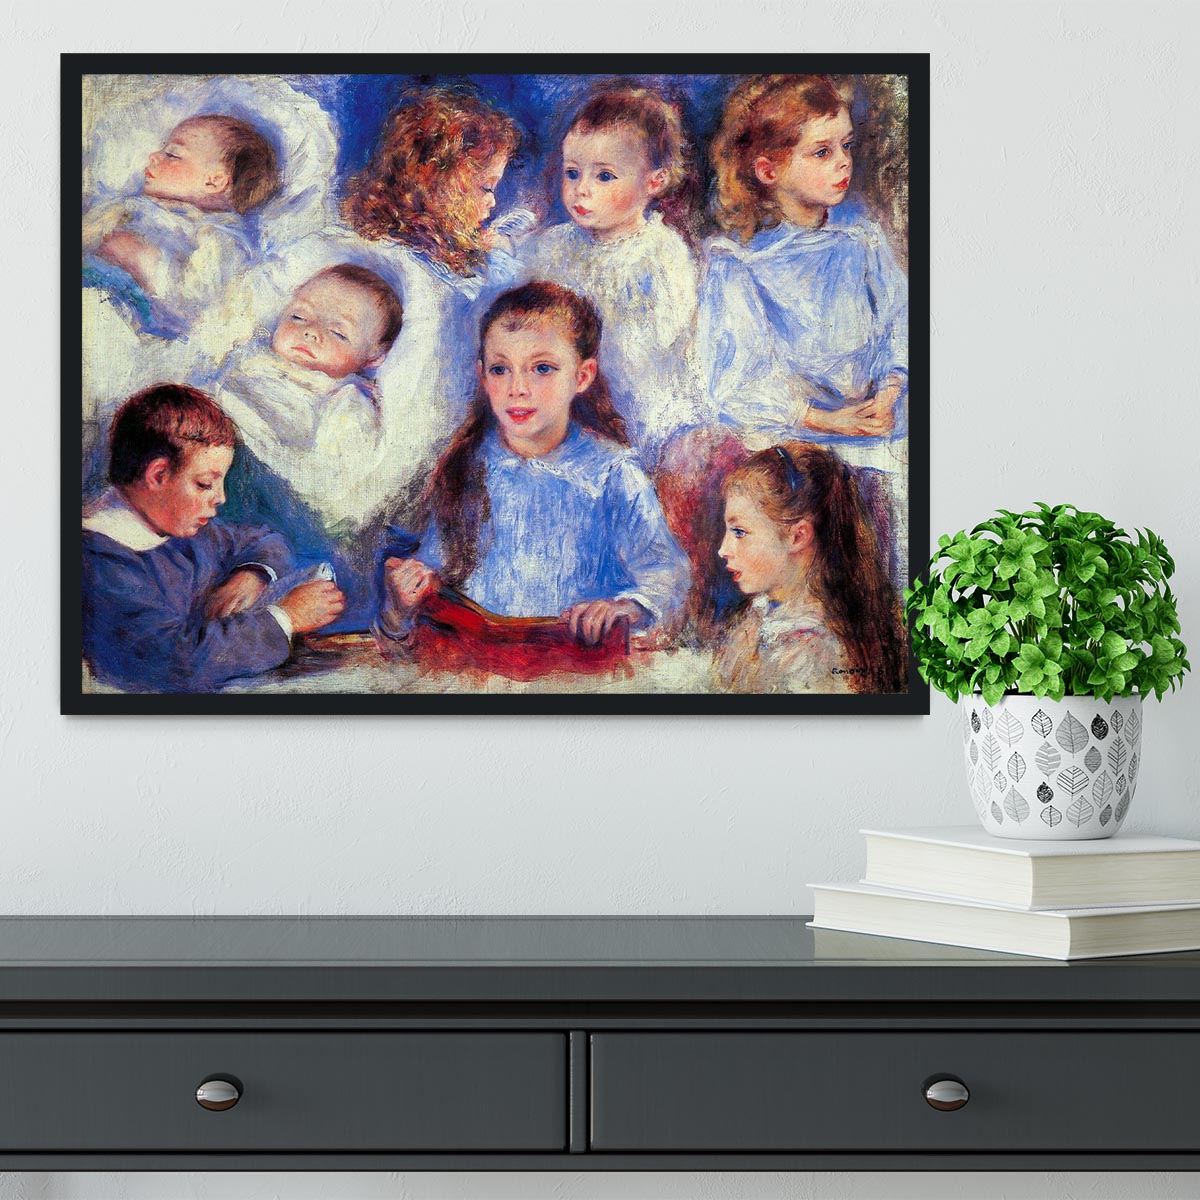 Images of childrens character heads by Renoir Framed Print - Canvas Art Rocks - 2